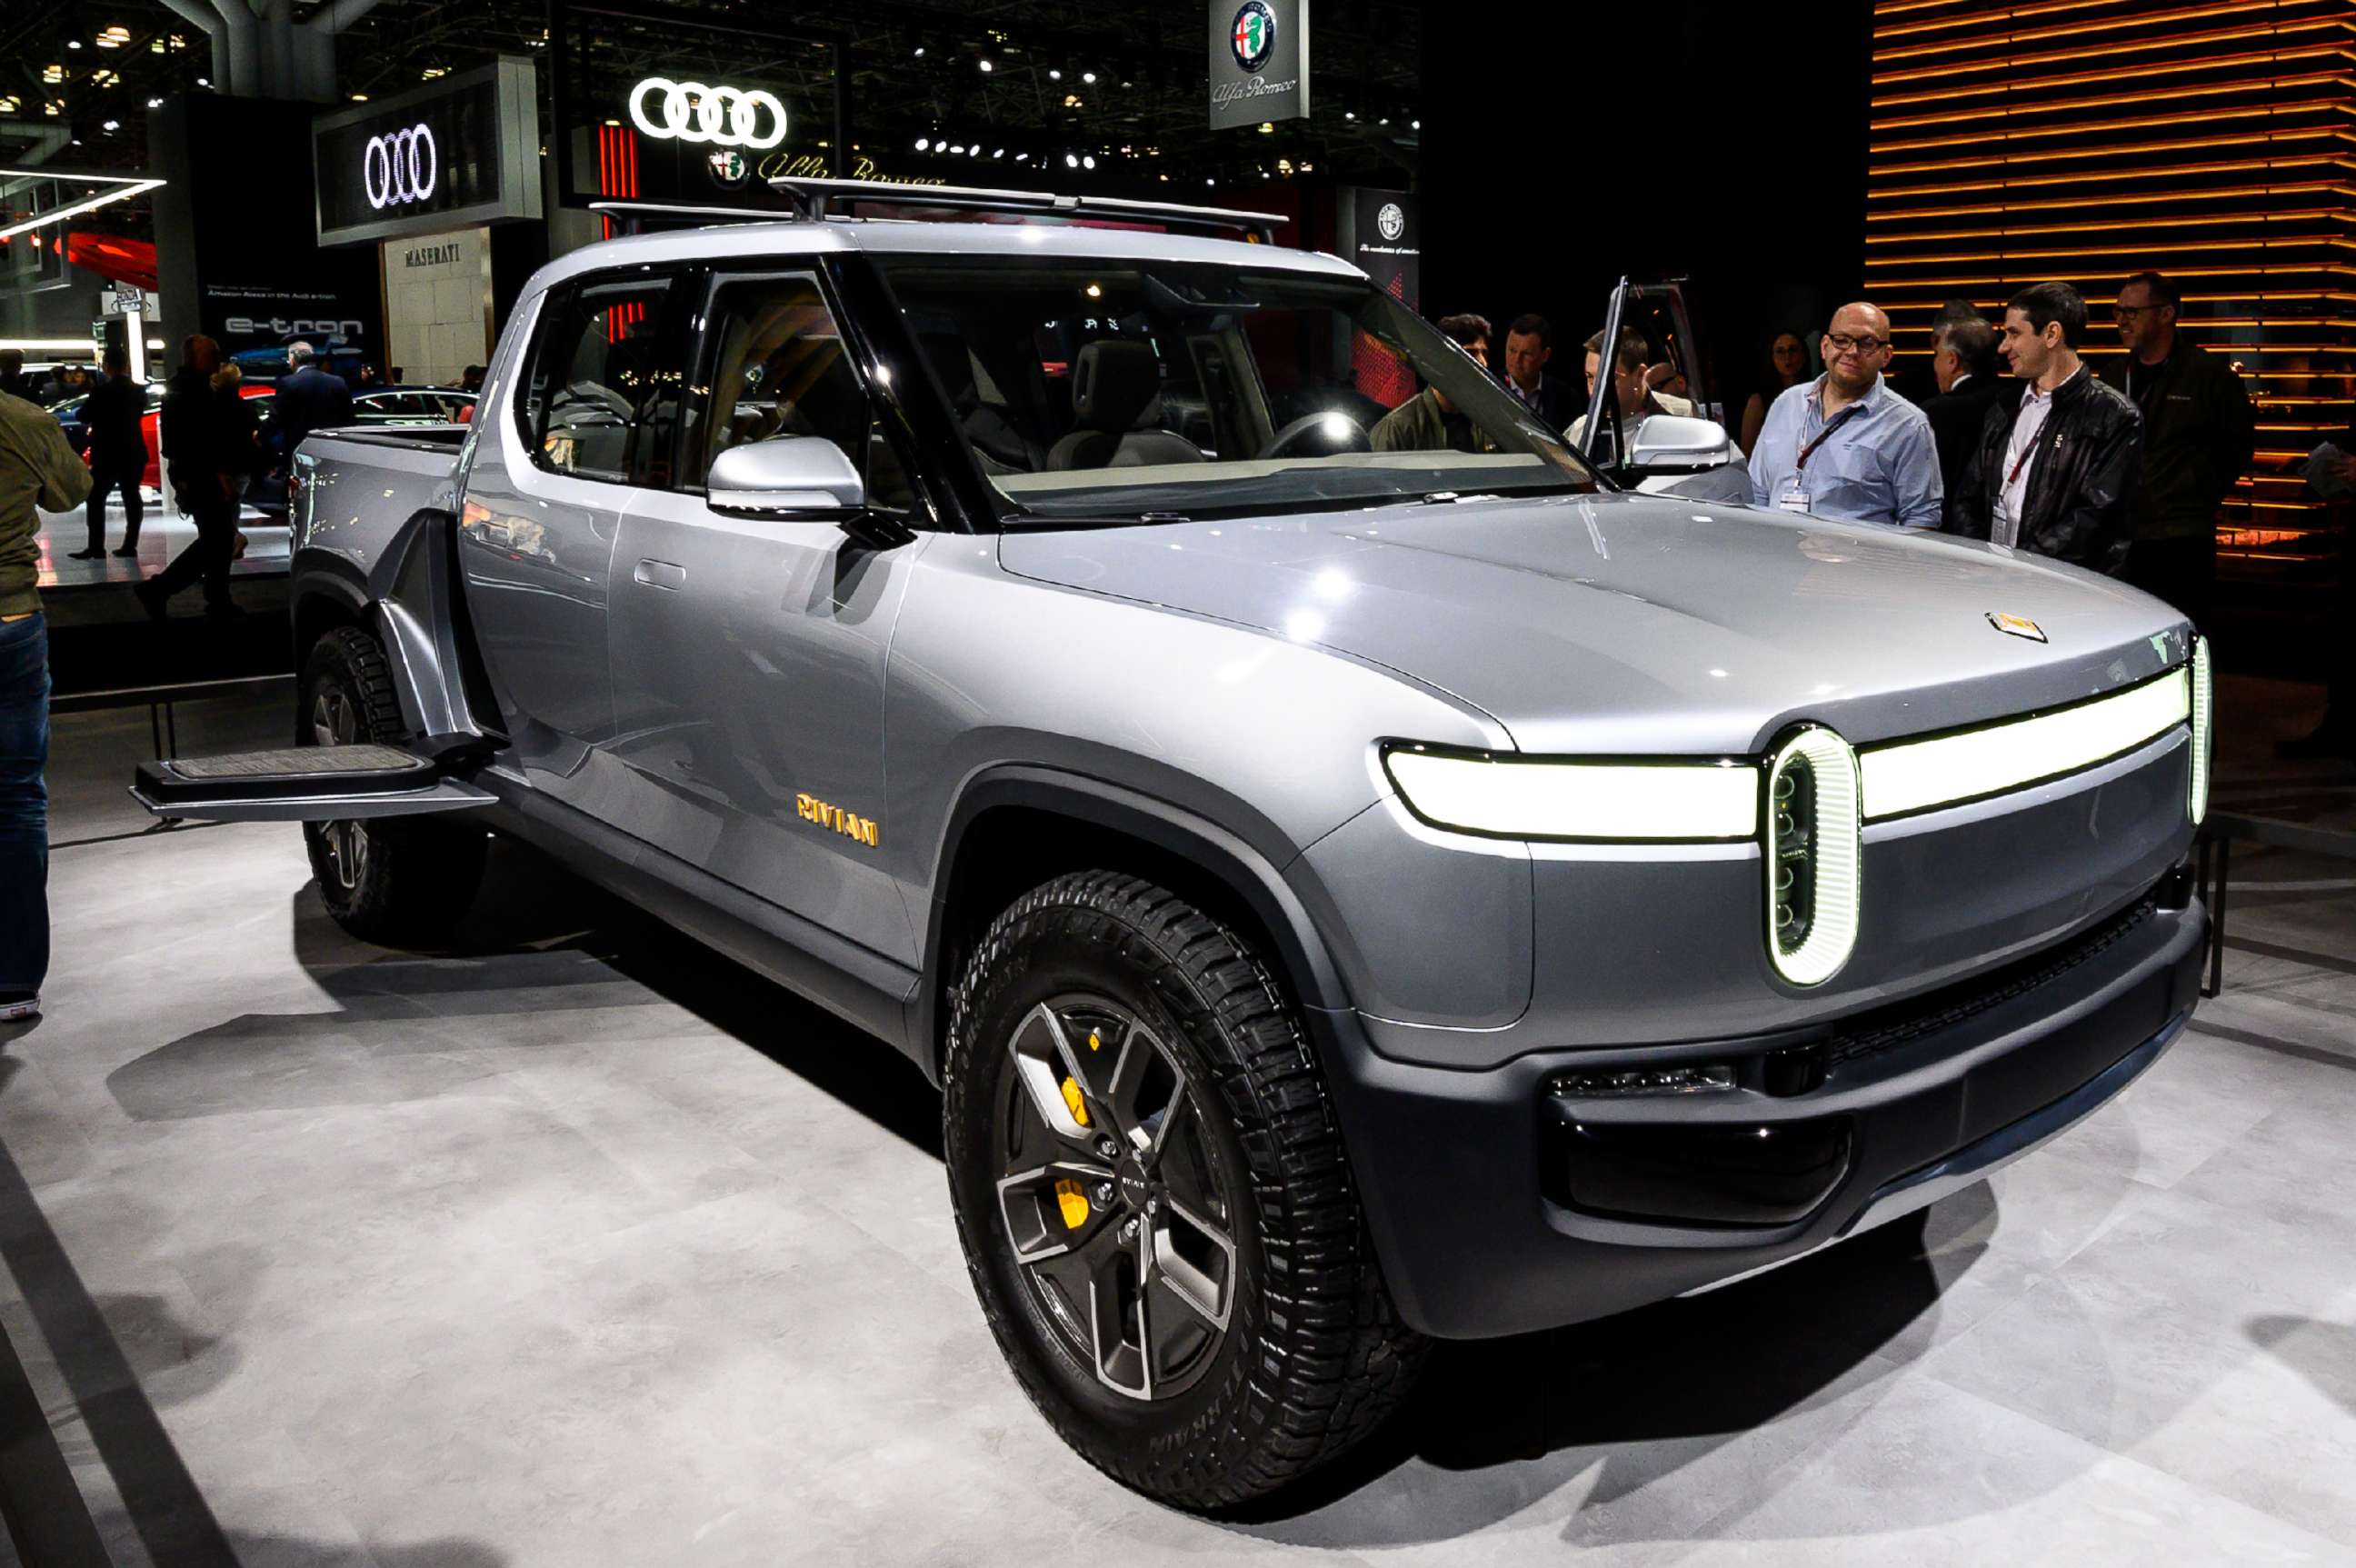 PHOTO: A Rivian R1T pickup truck is seen at the New York International Auto Show at the Jacob K. Javits Convention Center in New York, April 17, 2019.